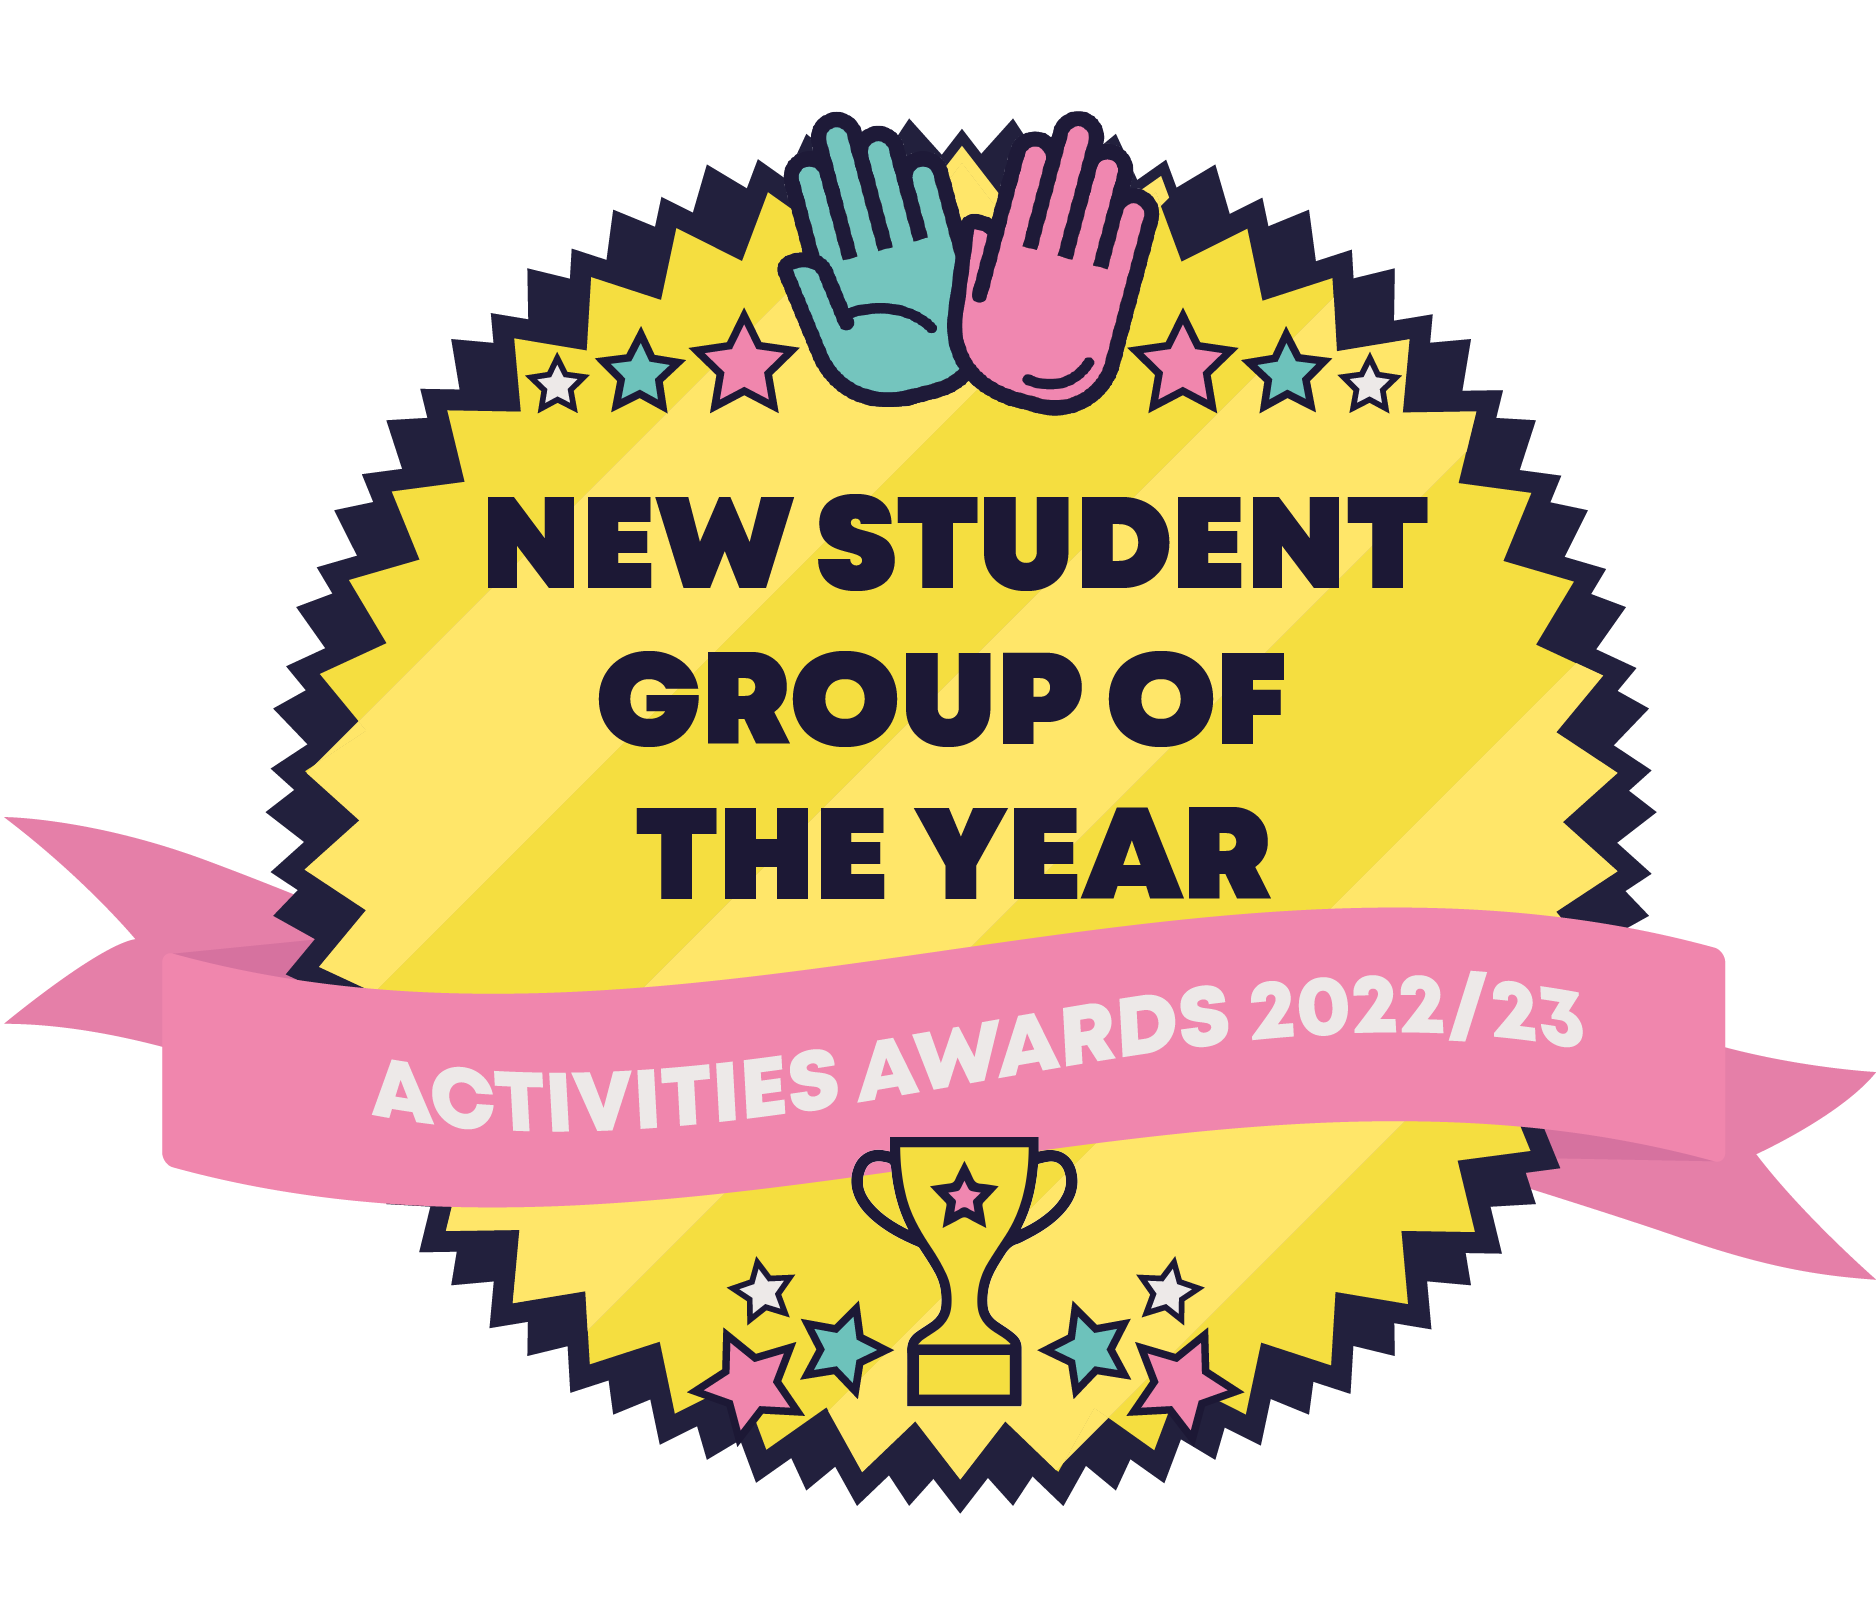 New Student Group of the Year